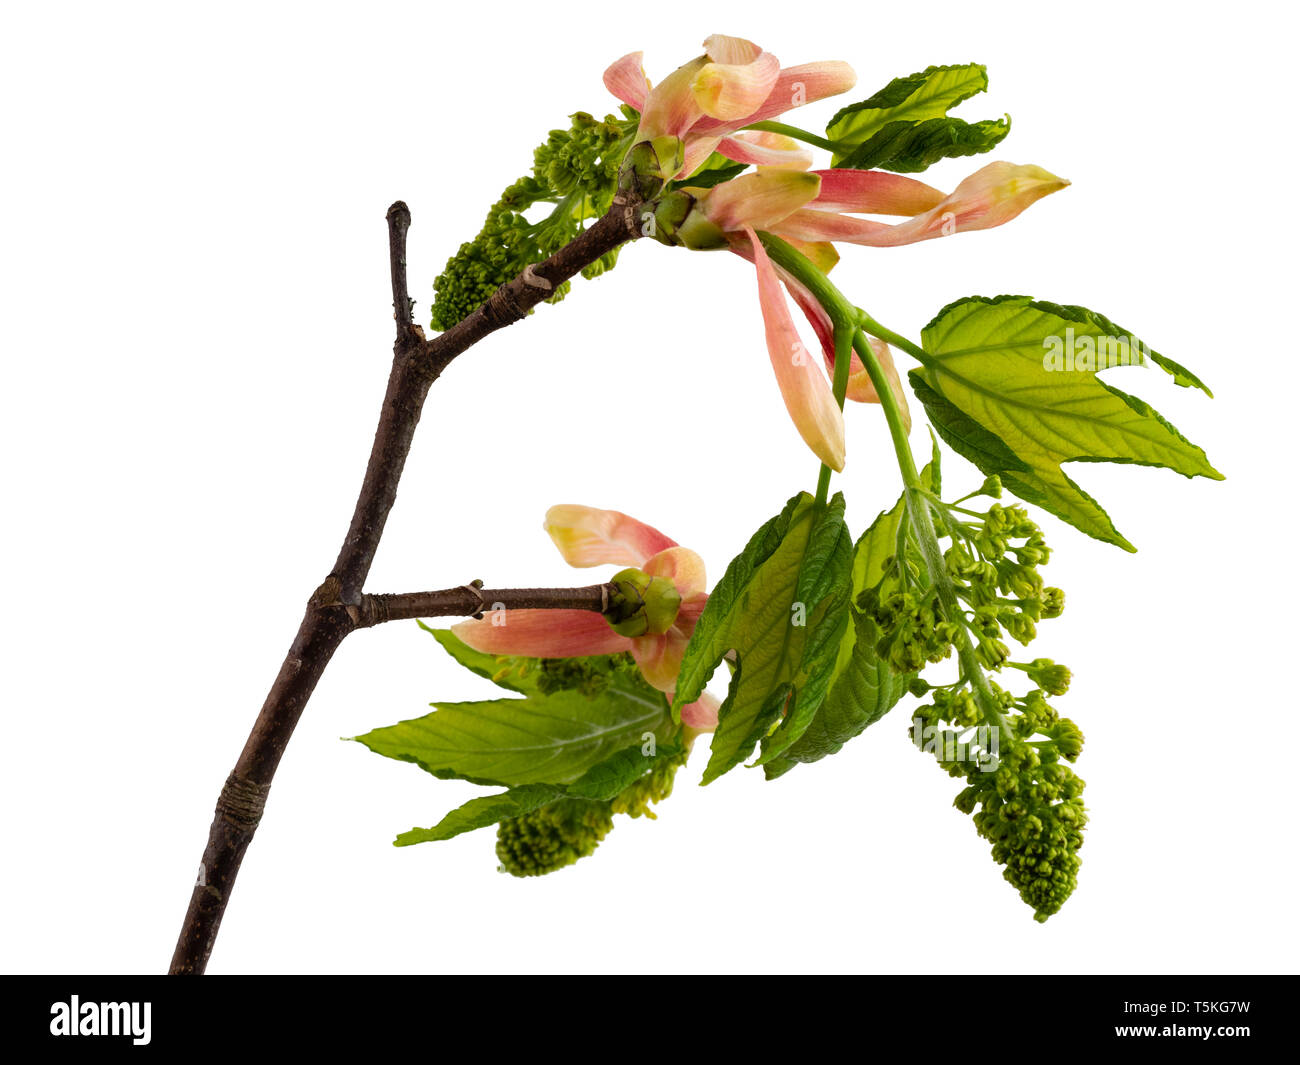 Emerging flowers and foliage of Acer pseudoplatanus, the sycamore tree, on a white background Stock Photo